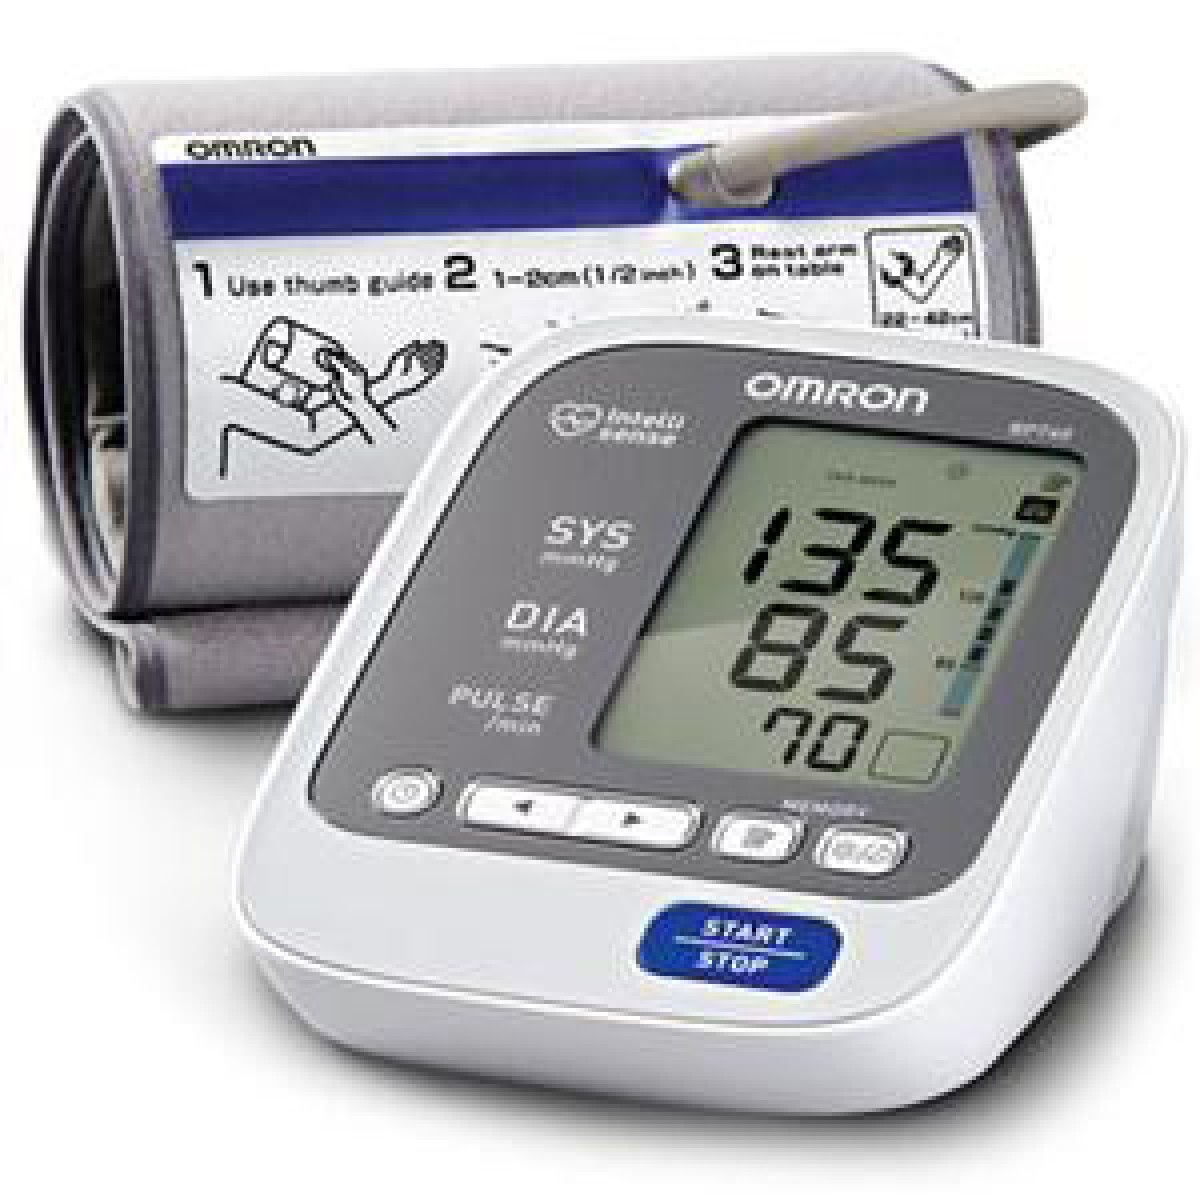 OMRON 7 Series Upper Arm Blood Pressure Monitor BP760 ON SALE with ...